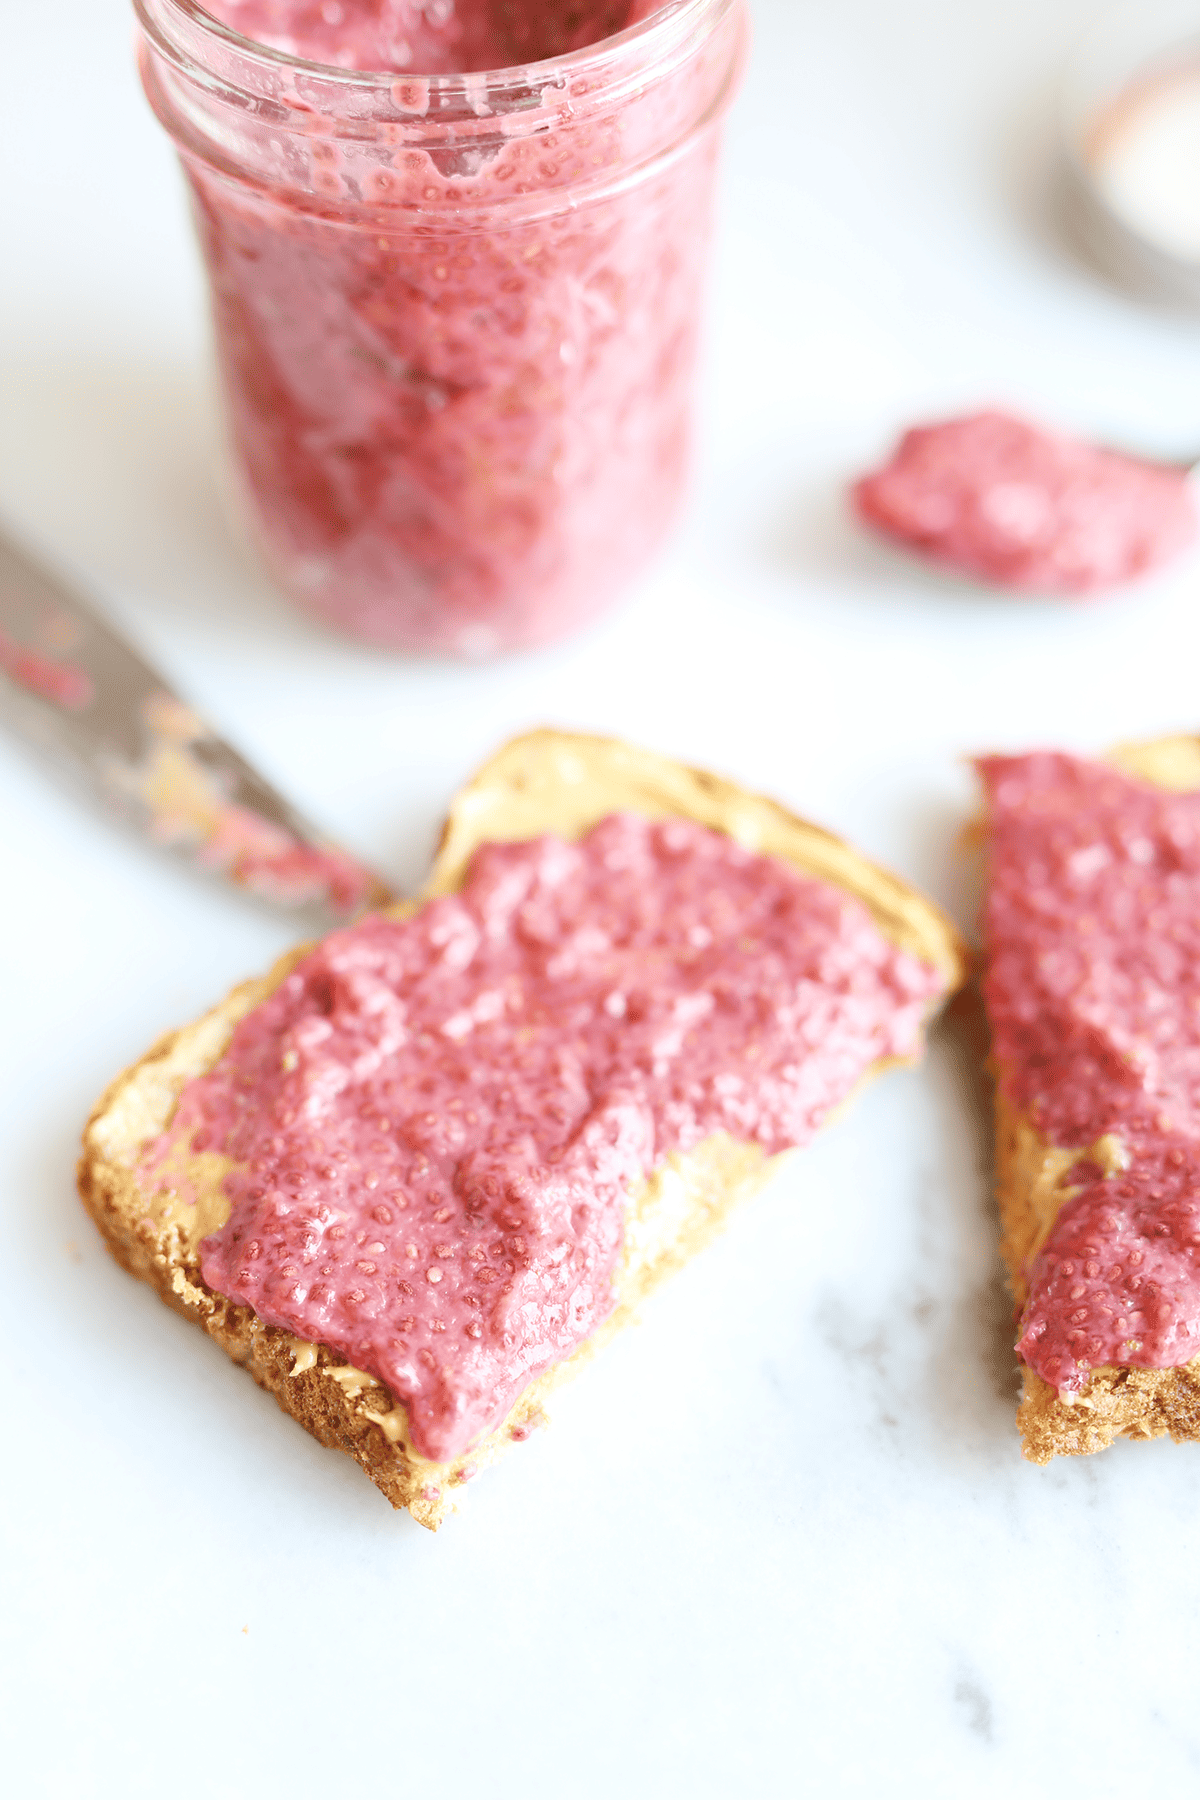 This Strawberry Chia Jam is SUPER easy to make, only requires 3 ingredients, naturally sweetened and wayyy healthier than star bought jams.